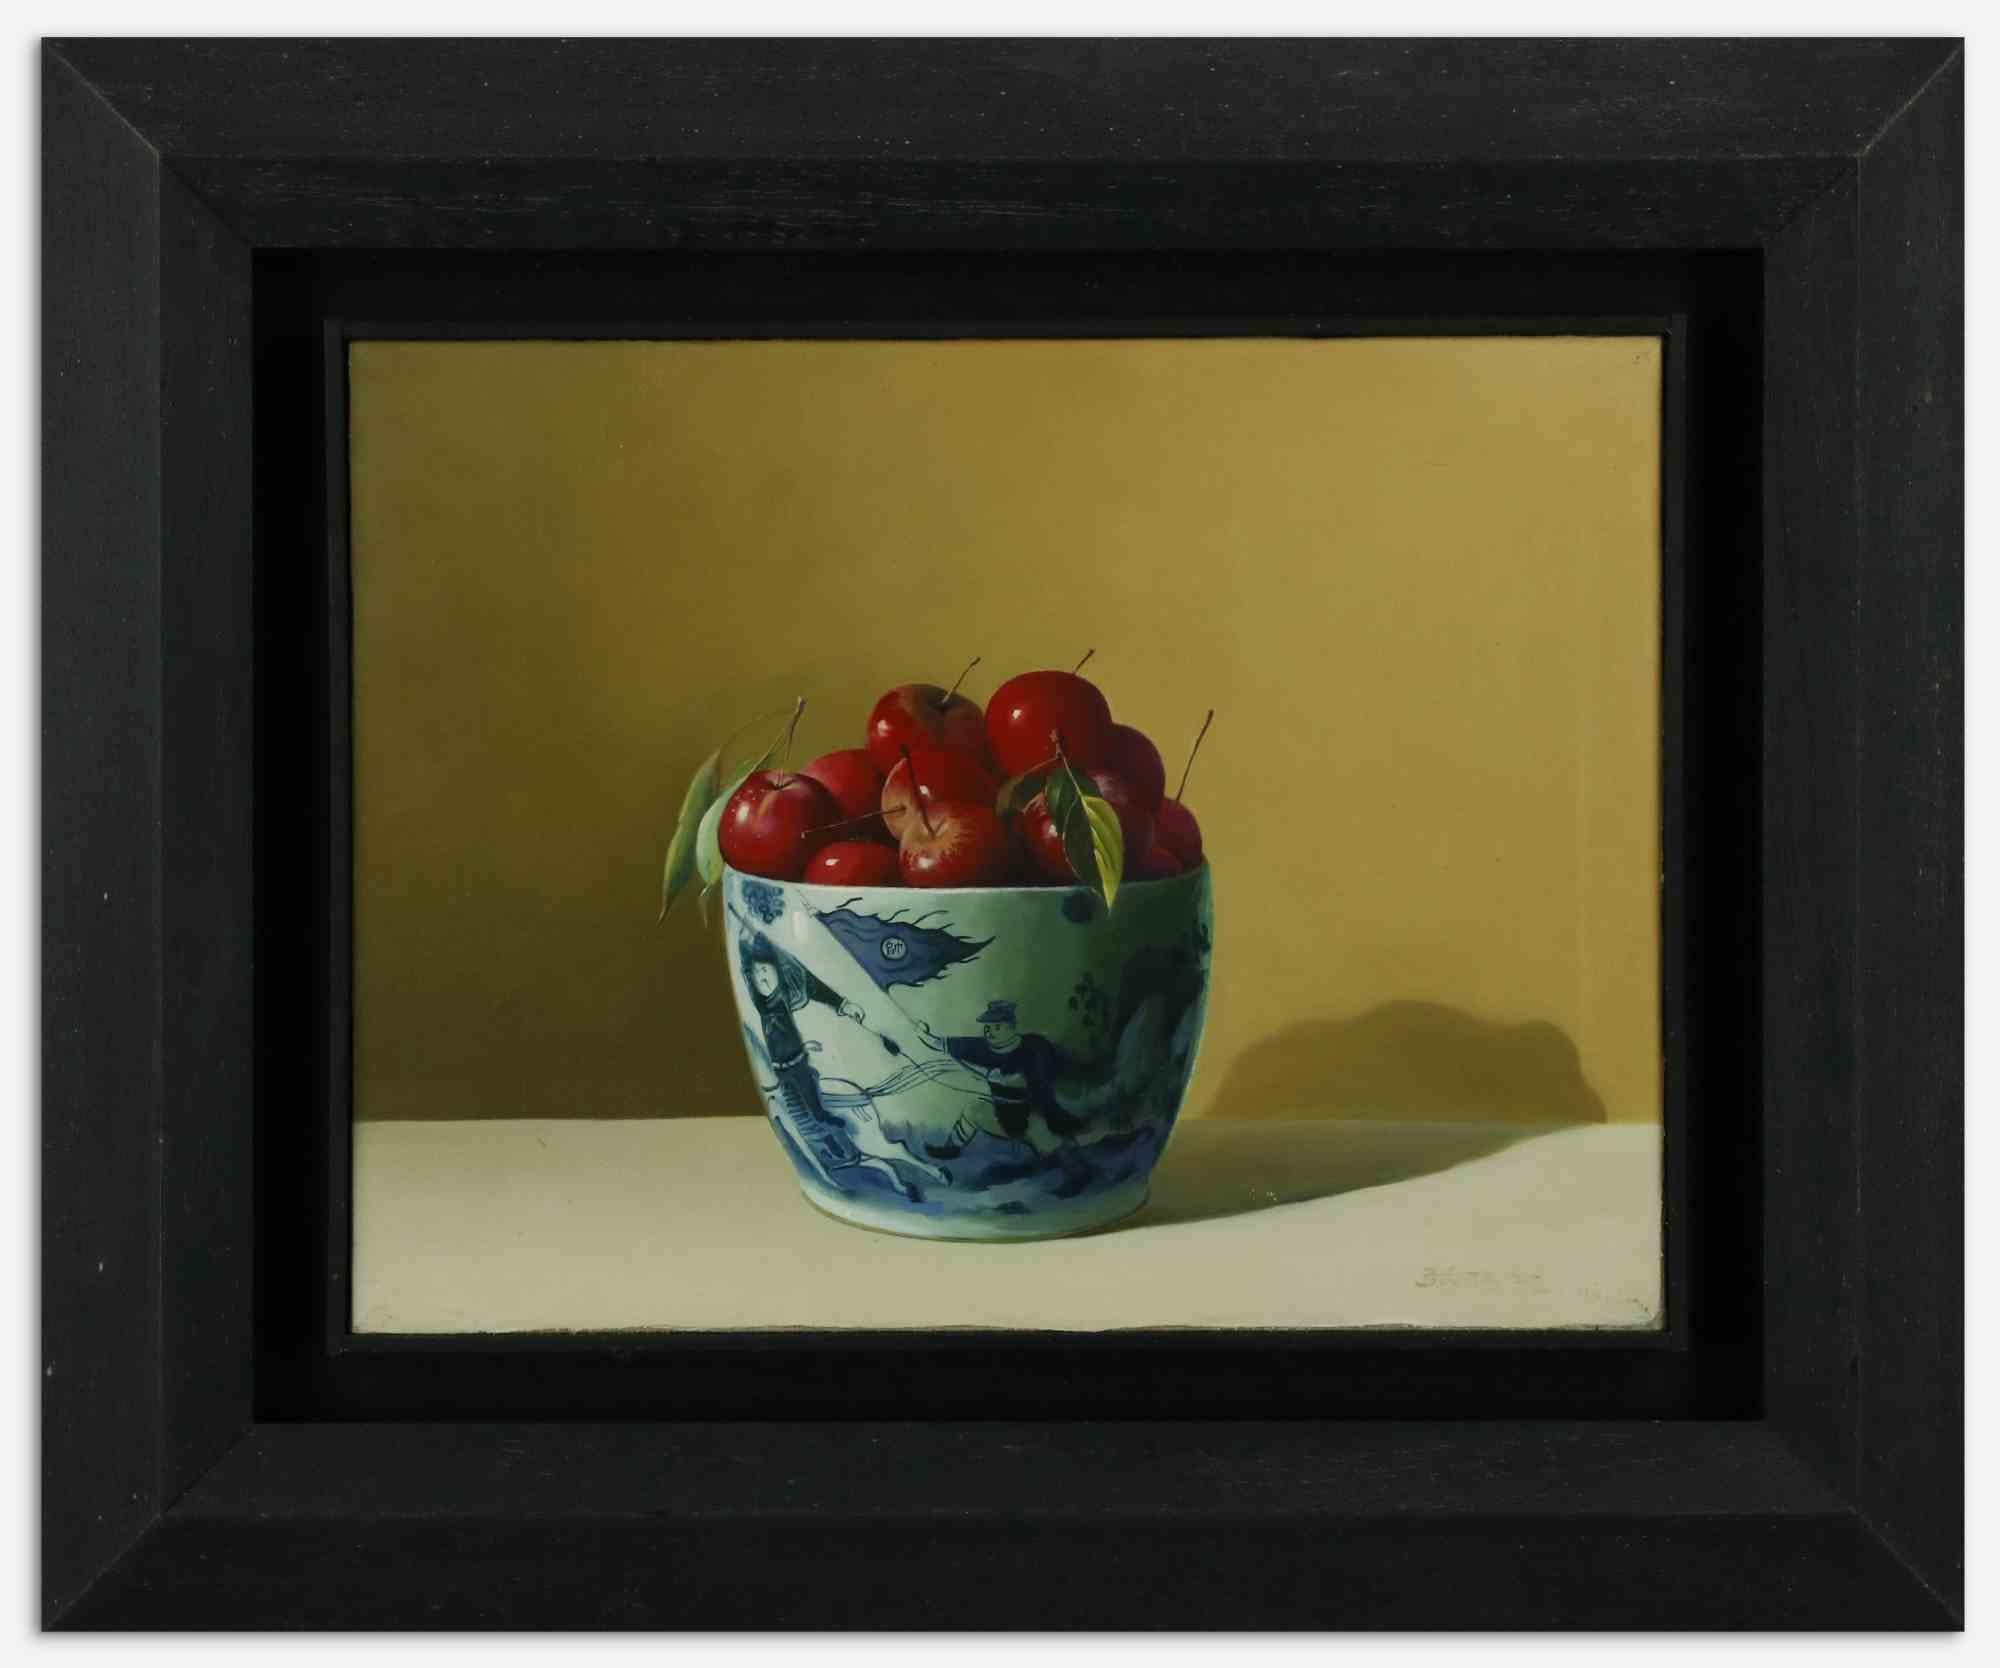 Cherries is an  oil painting realized in 2007 by Zhang Wei Guang (Mirror).

Beautiful oil painting on canvas. 

Includes frame.

Hand-signed on the lower right corner.

Good conditions.

Zhang Wei Guang, also called ‘mirror' was born in Helong Jang,